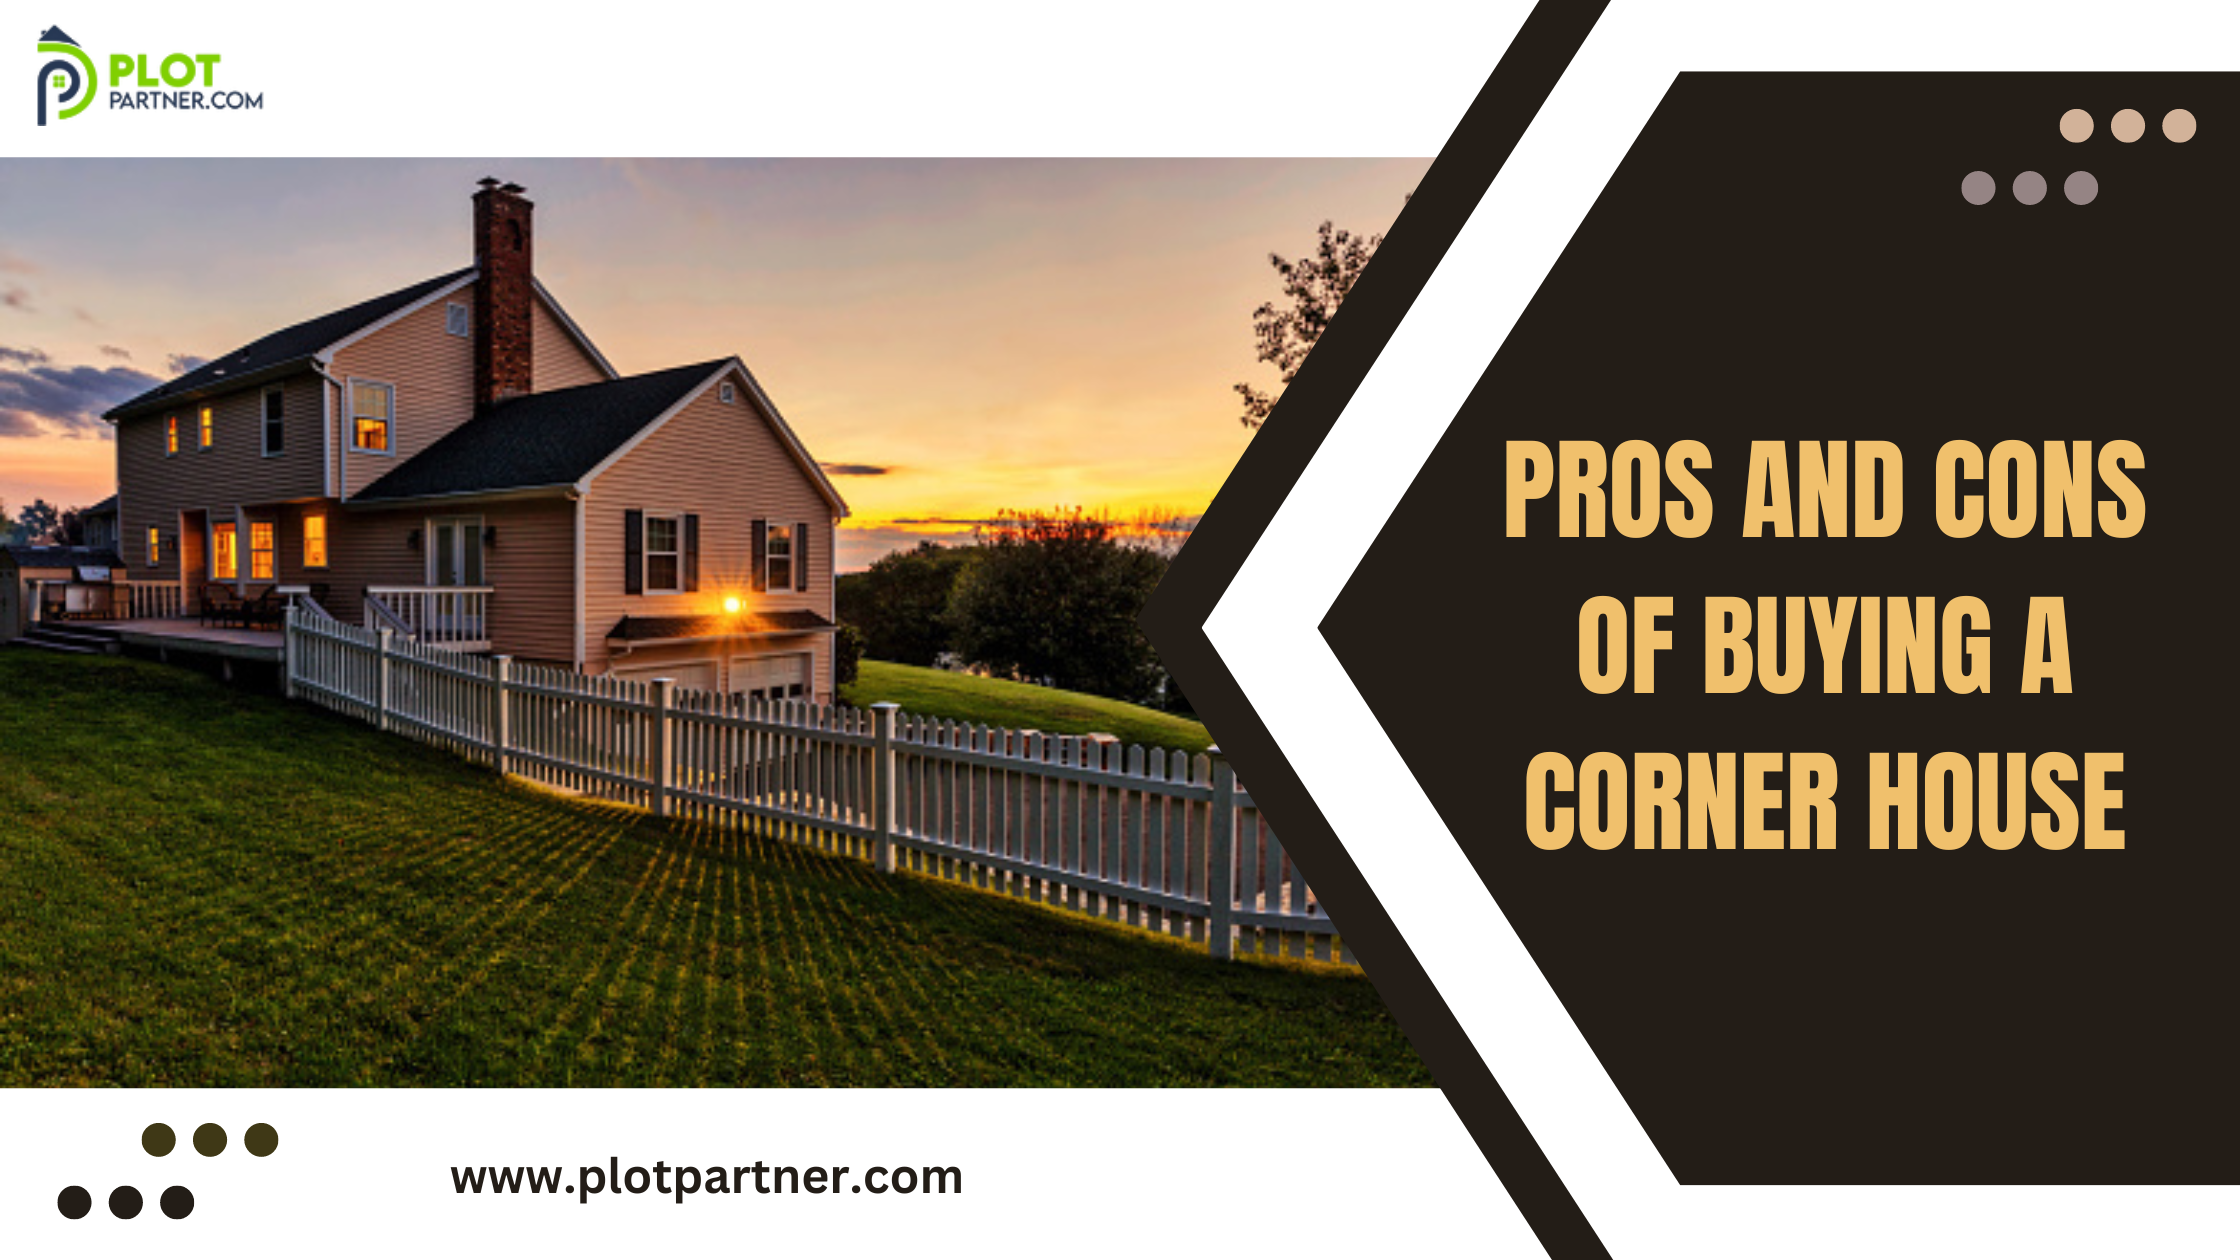 Should You Buy a Corner House? The Pros and Cons